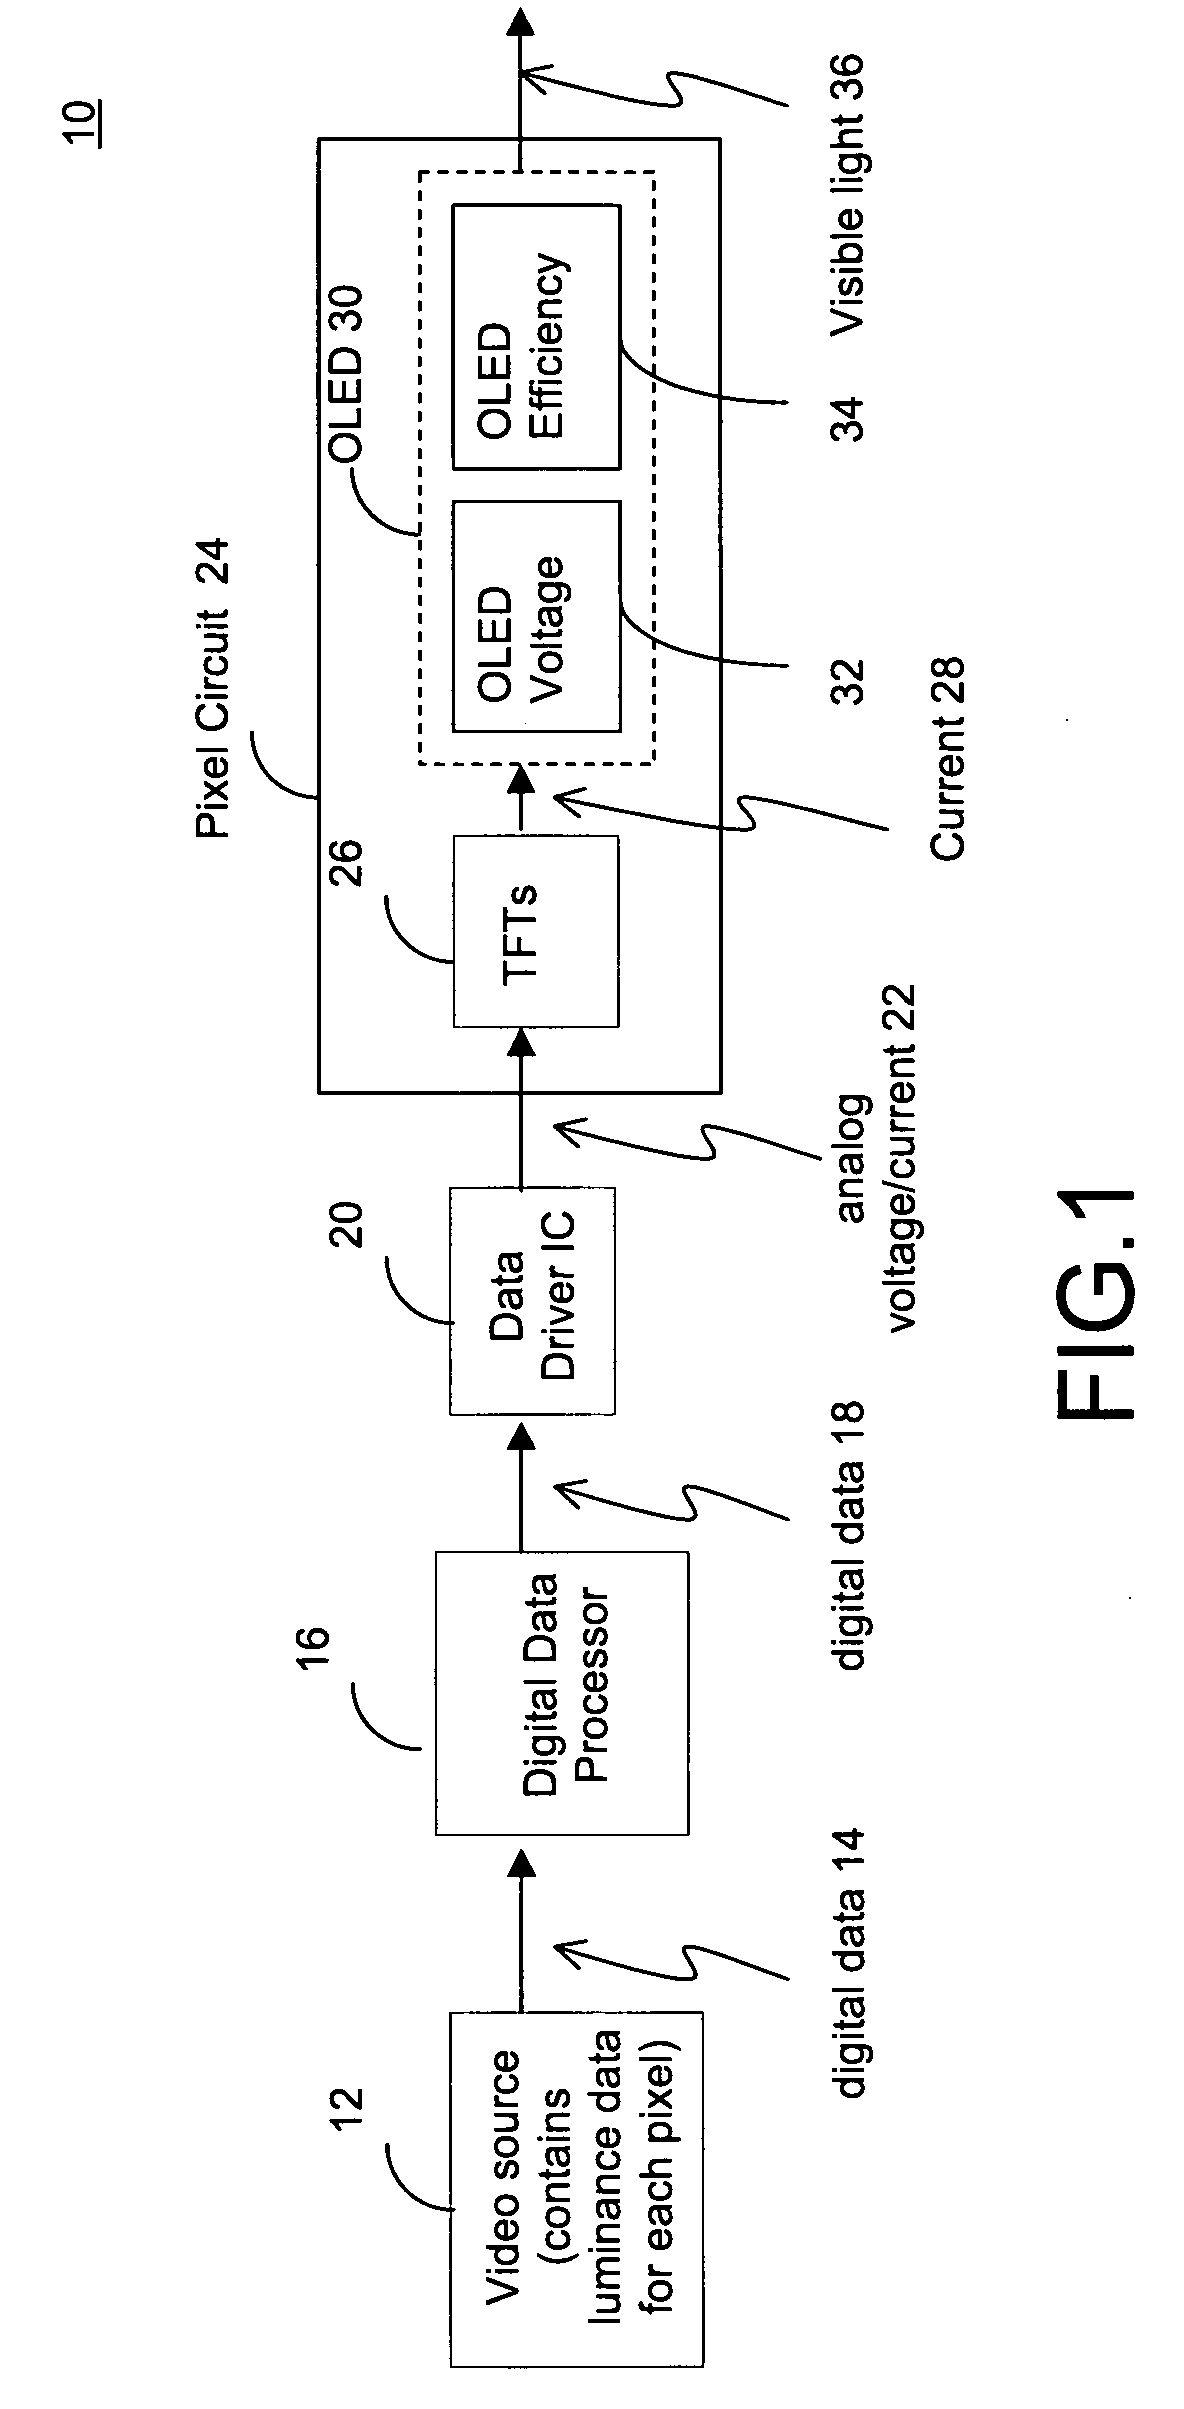 Method and system for compensation of non-uniformities in light emitting device displays